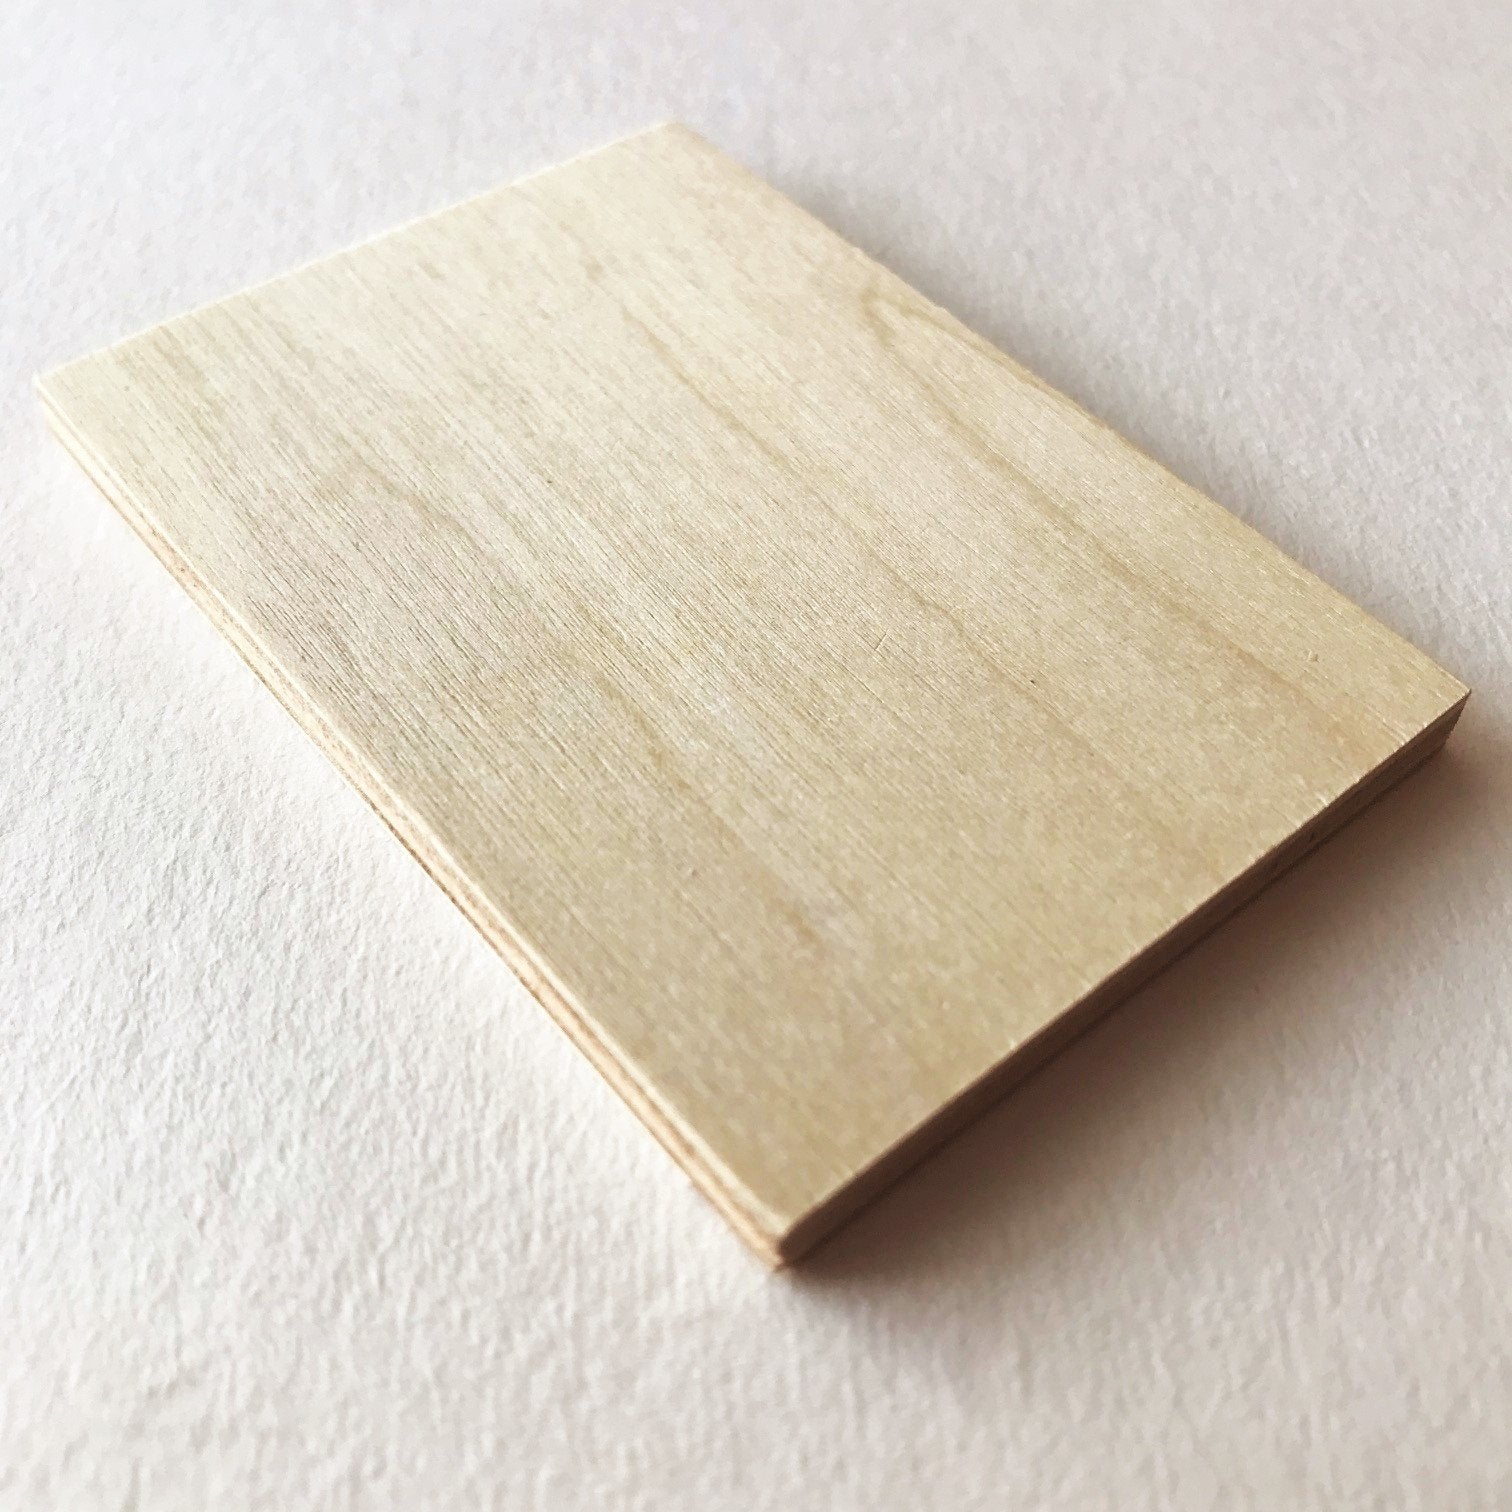 Where can someone buy thin sheets of wood for laser cutting? : r